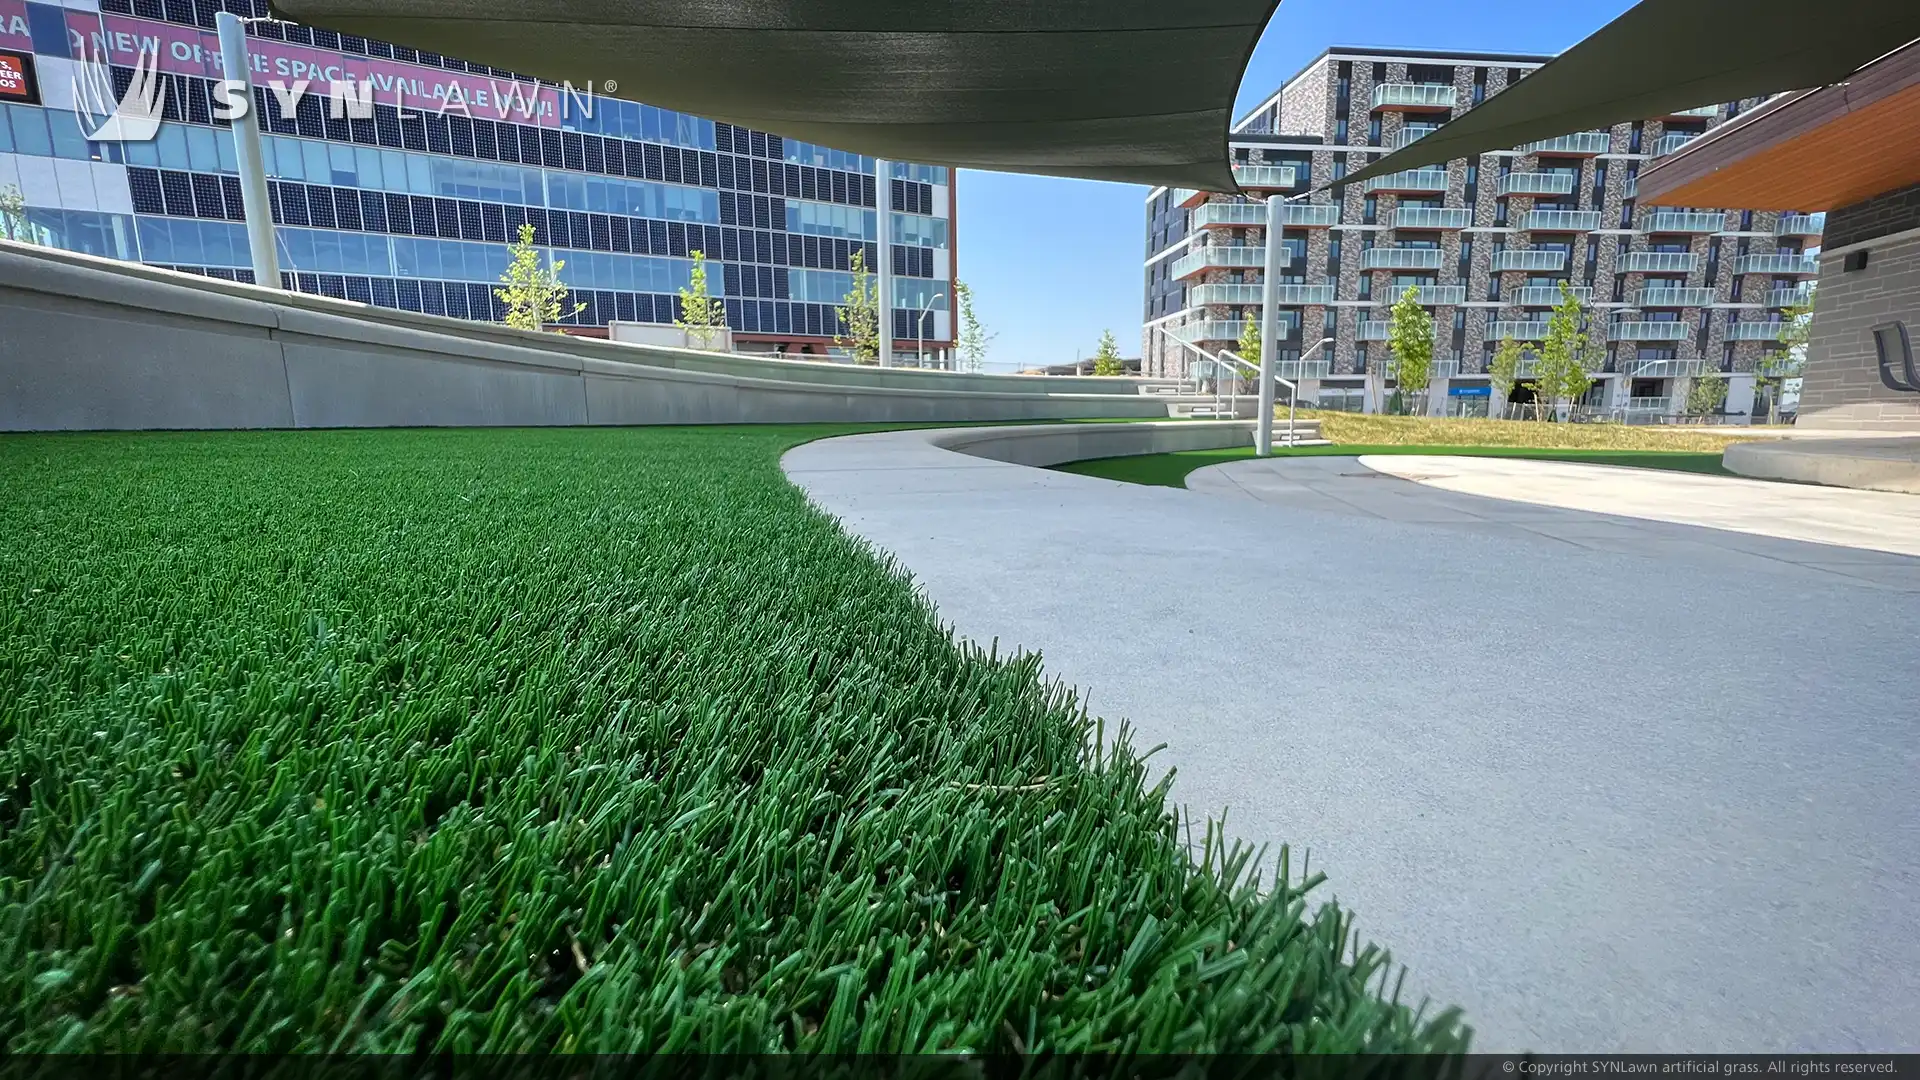 image of SYNLawn artificial grass at West 5 net zero community amphitheater London Toronto Ontario